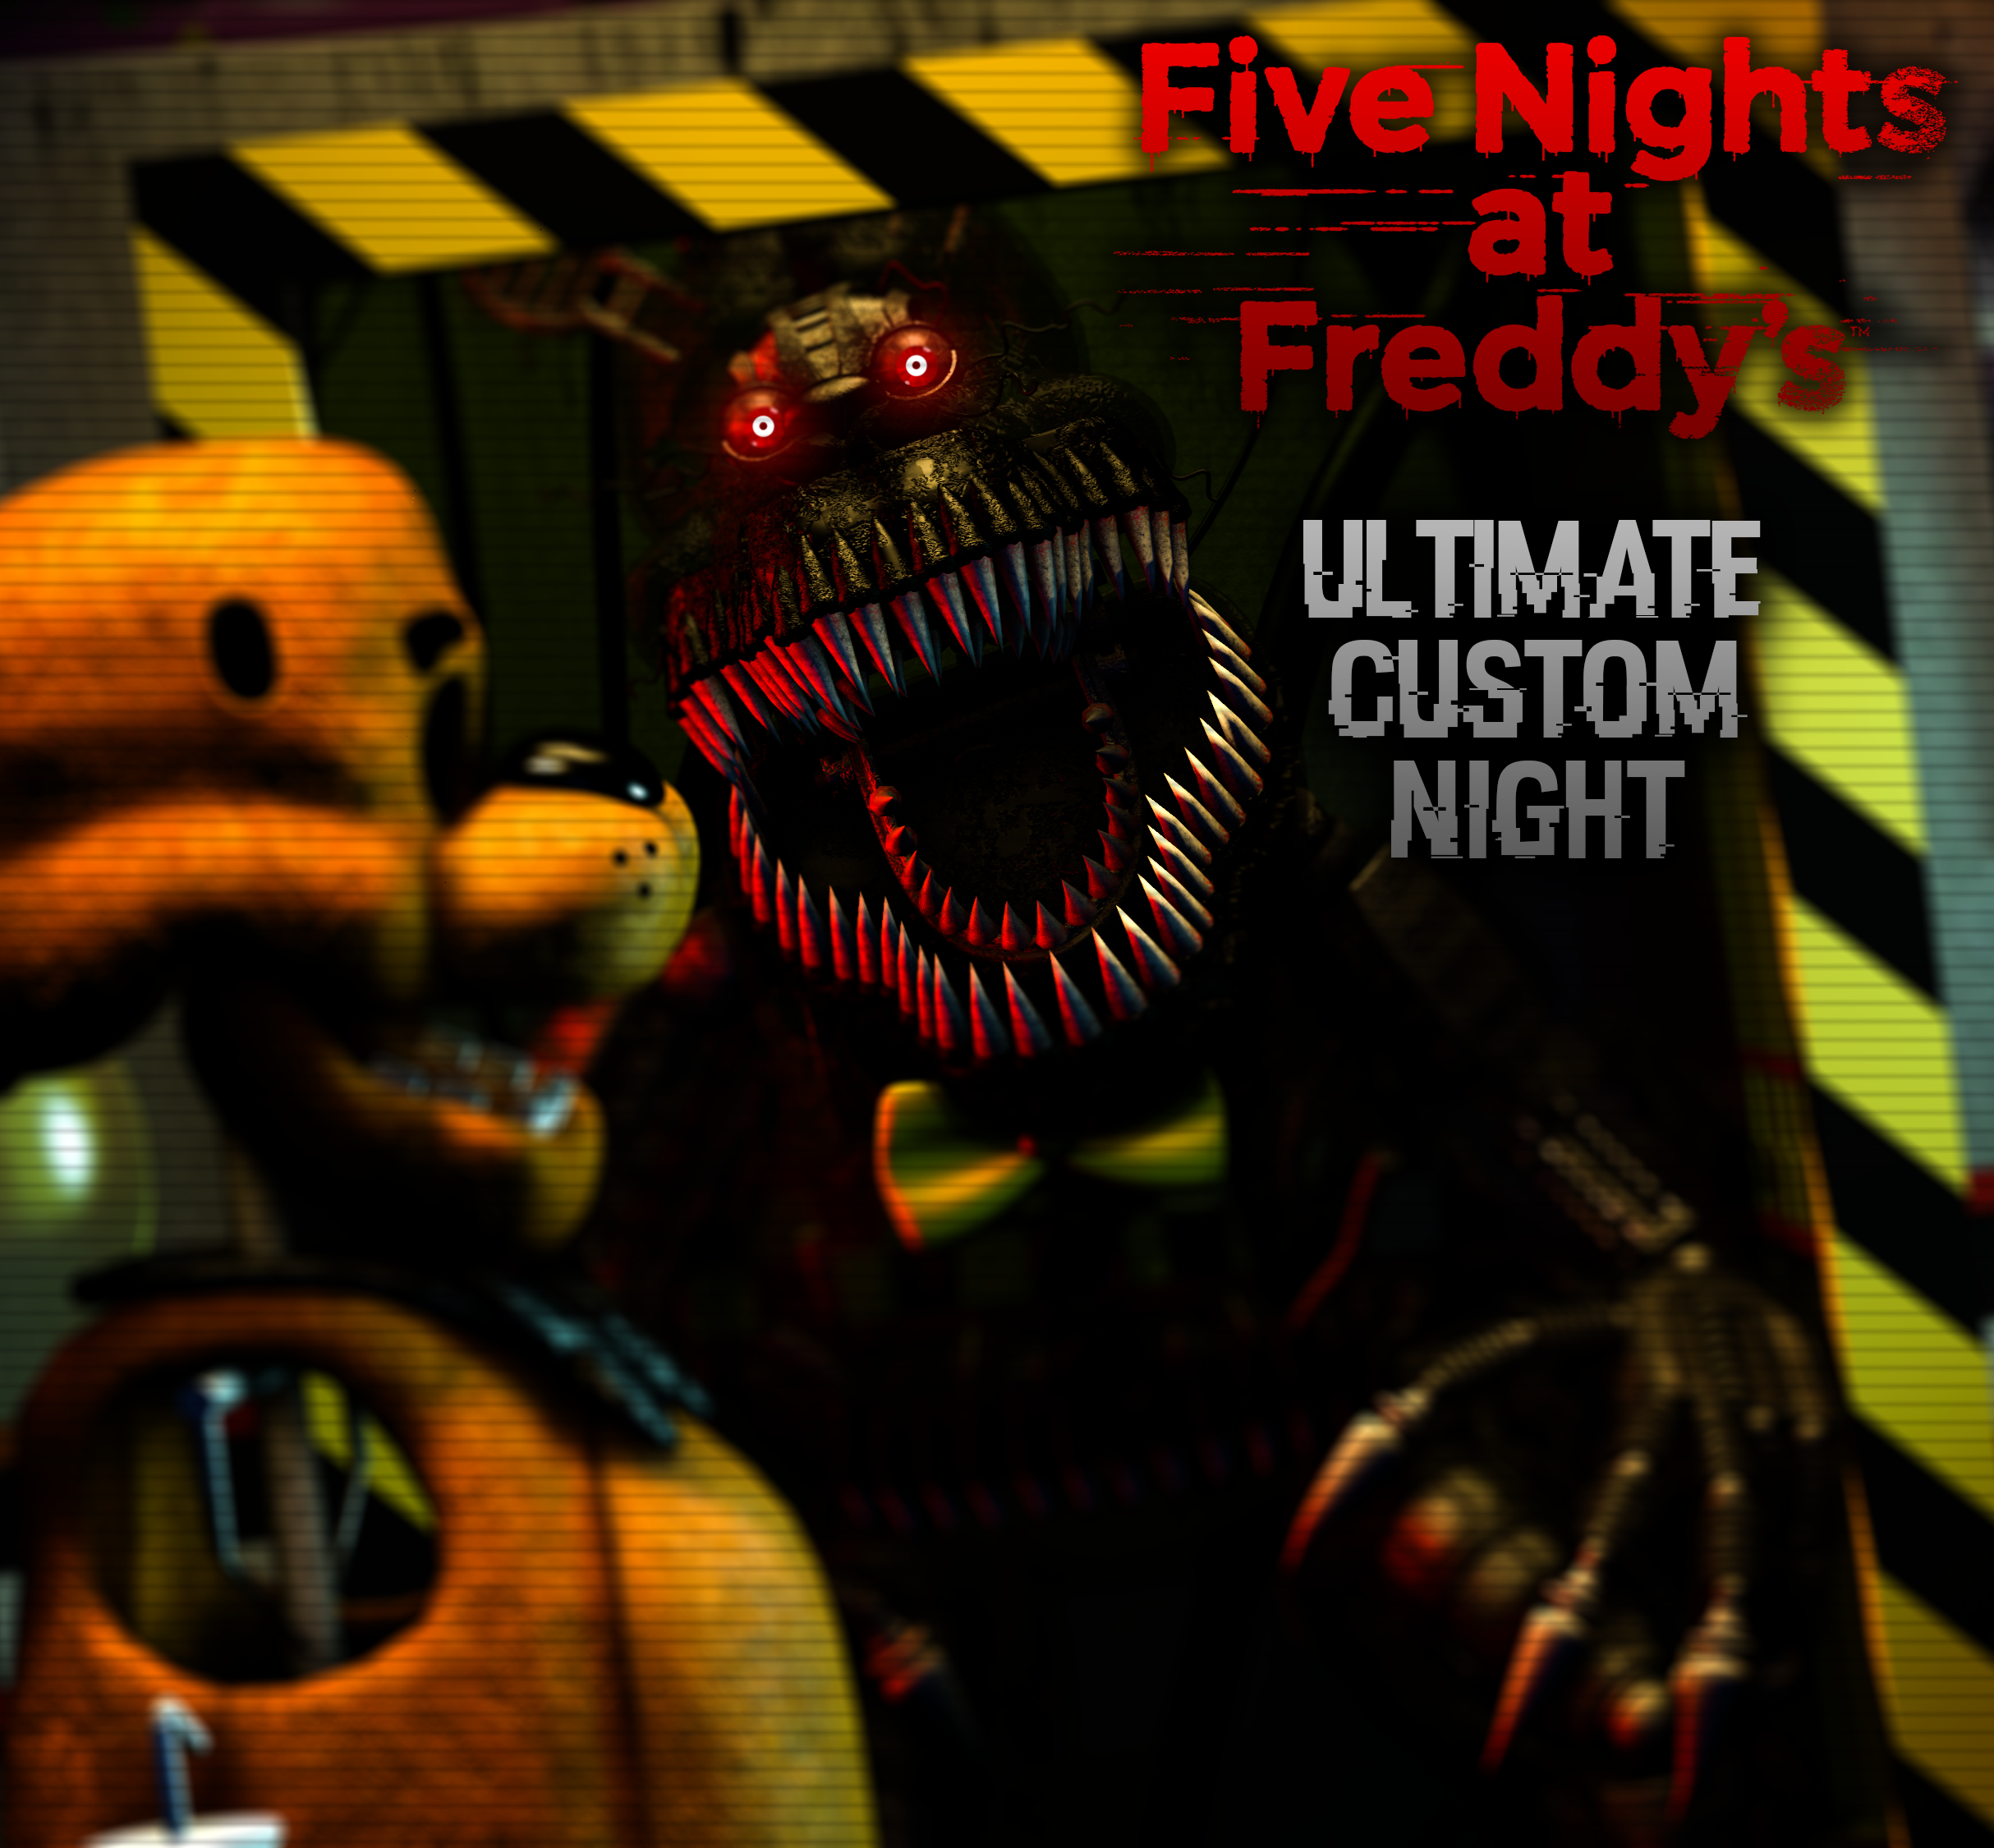 Ultimate Custom Night Home Screen! by Greenjelly-12 on DeviantArt